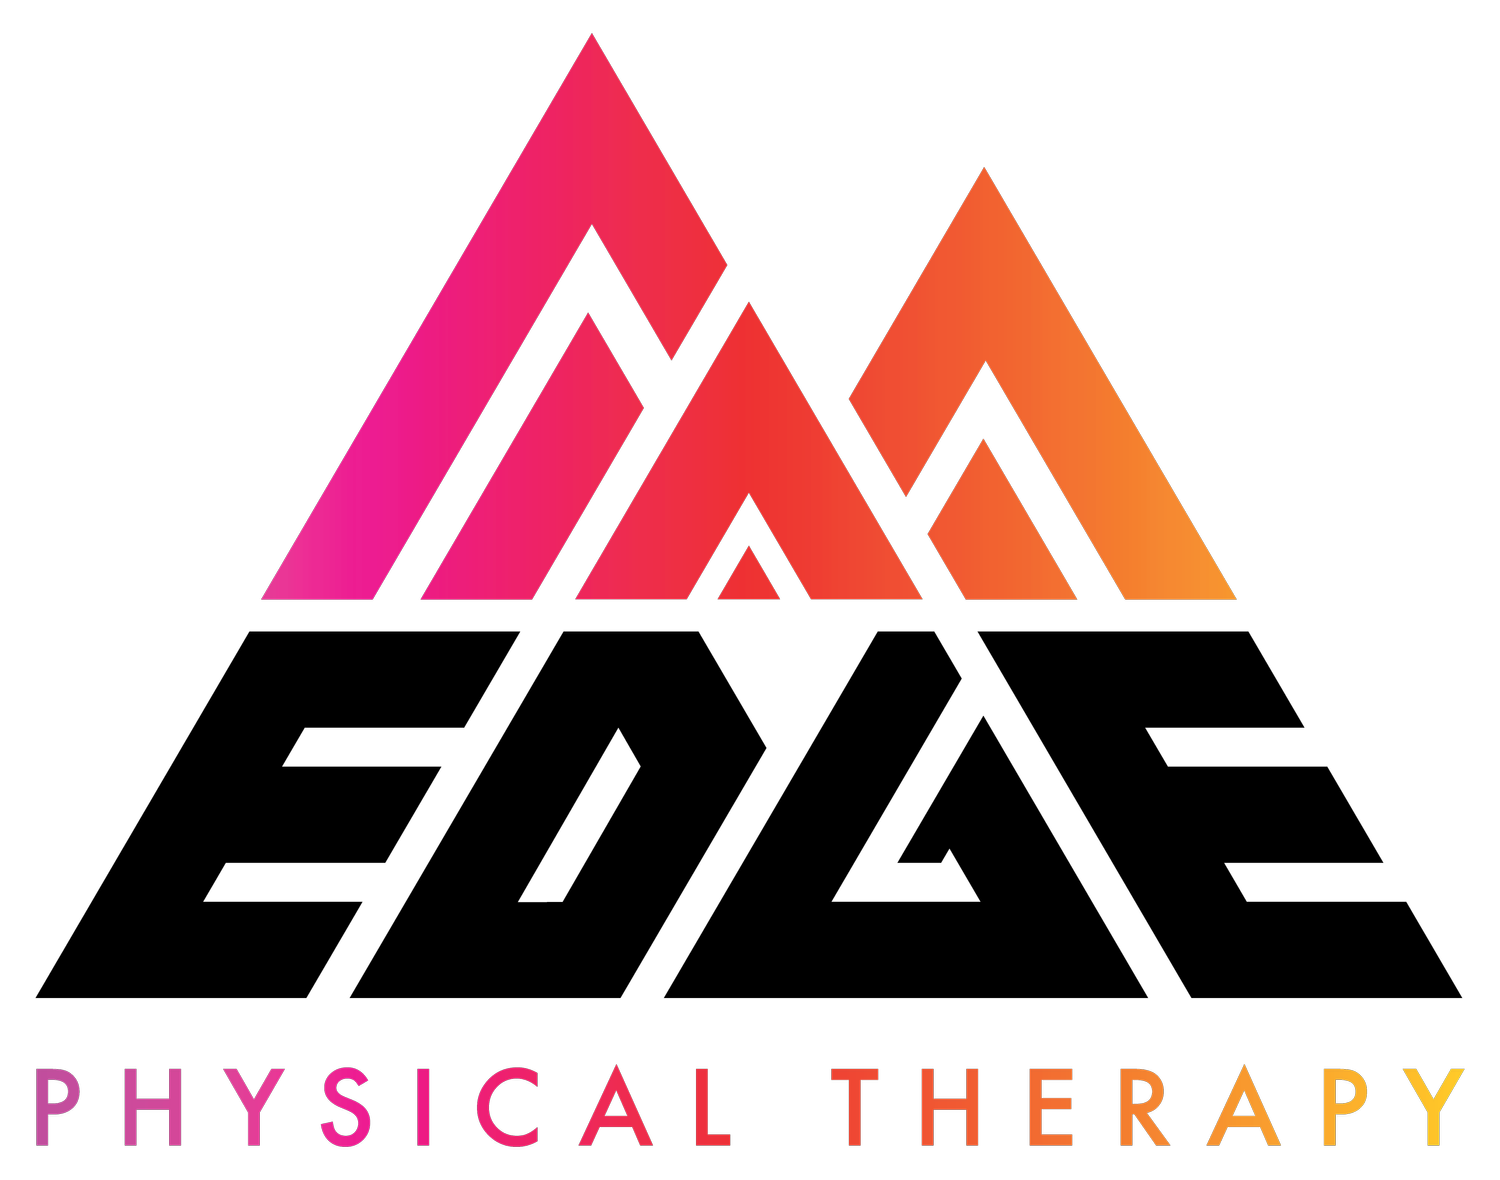 EDGE PHYSICAL THERAPY